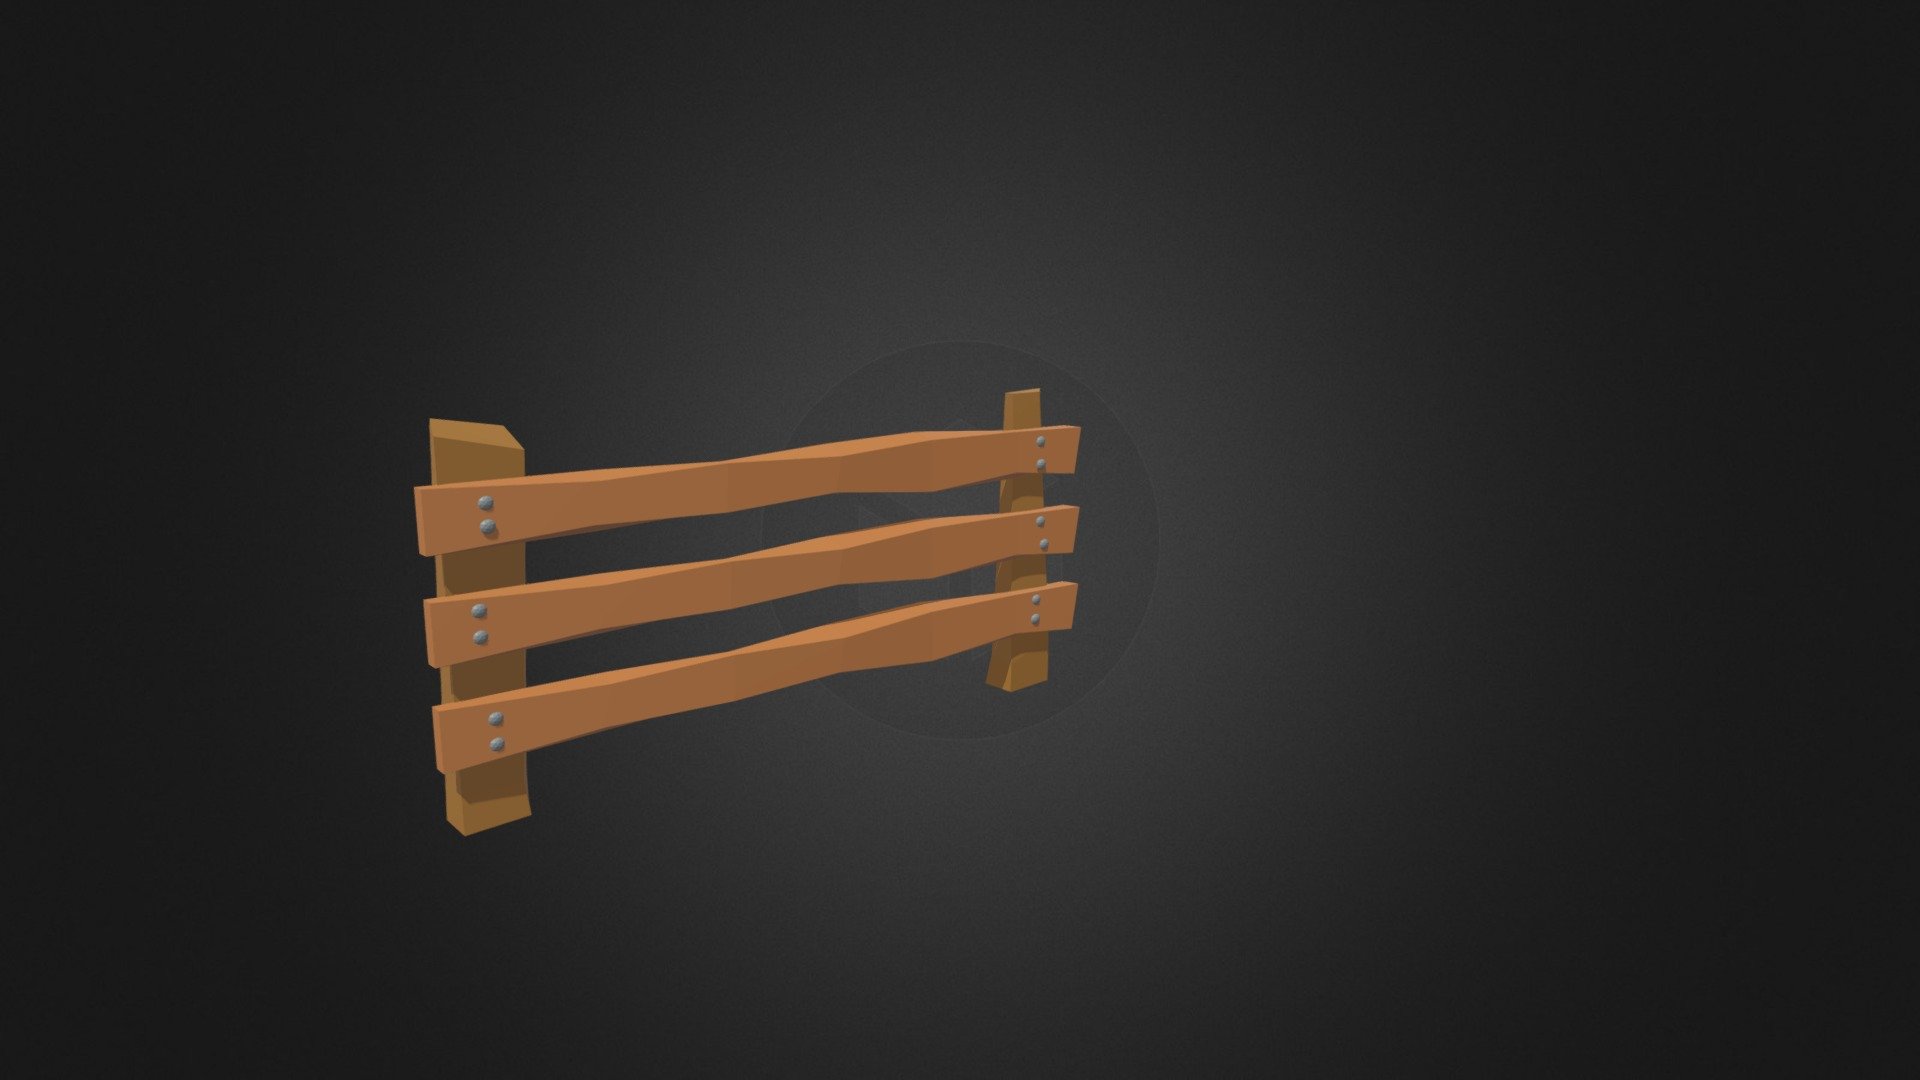 Wooden Fence